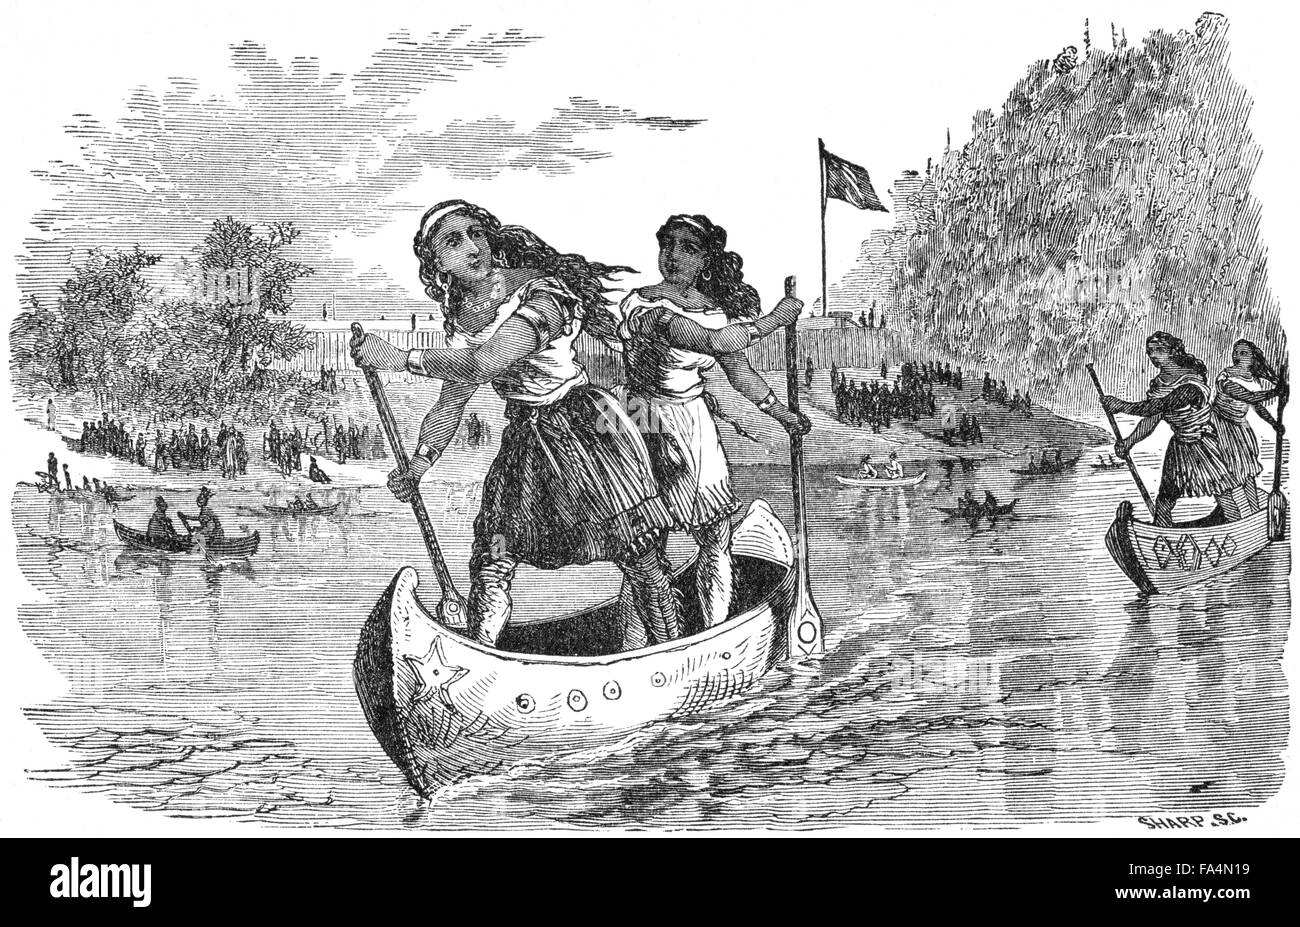 “Indian Amusements, Canoe Race Between Sioux Squaws” Sioux, by Artist S. C. Sharp, Book Illustration from “Indian Horrors or Massacres of the Red Men”, by Henry Davenport Northrop, 1891 Stock Photo